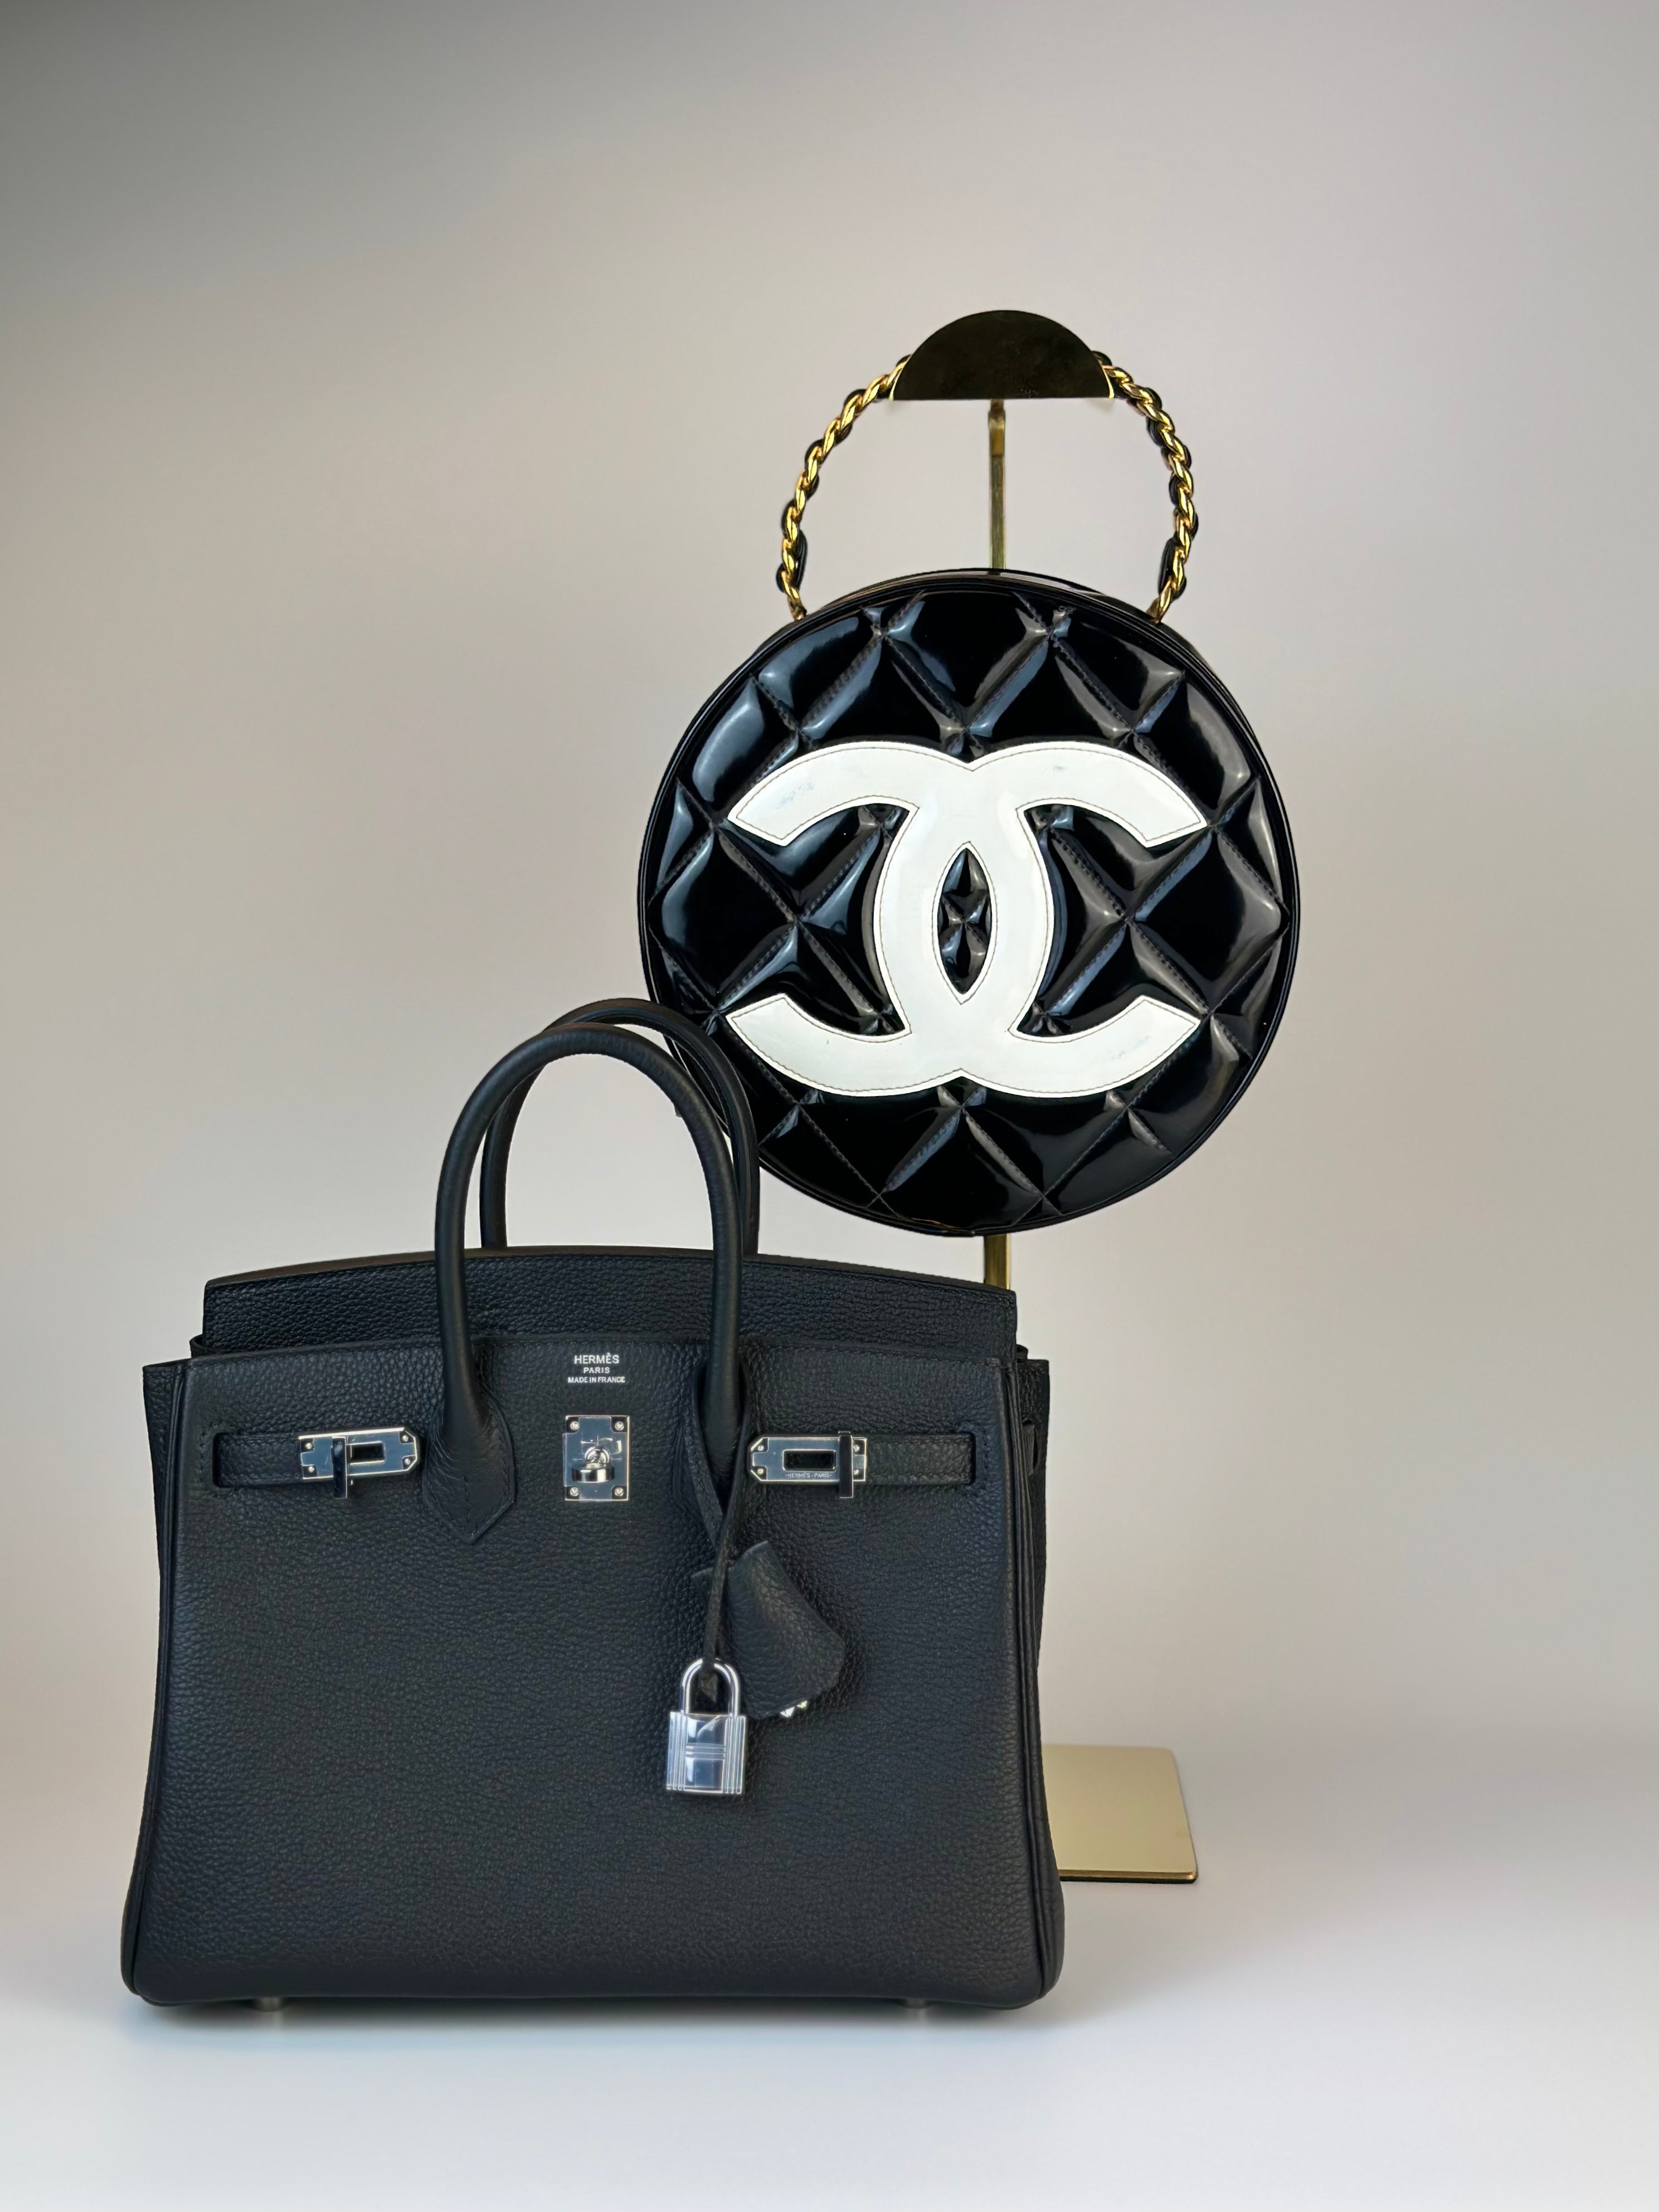 HERMES AND CHANEL